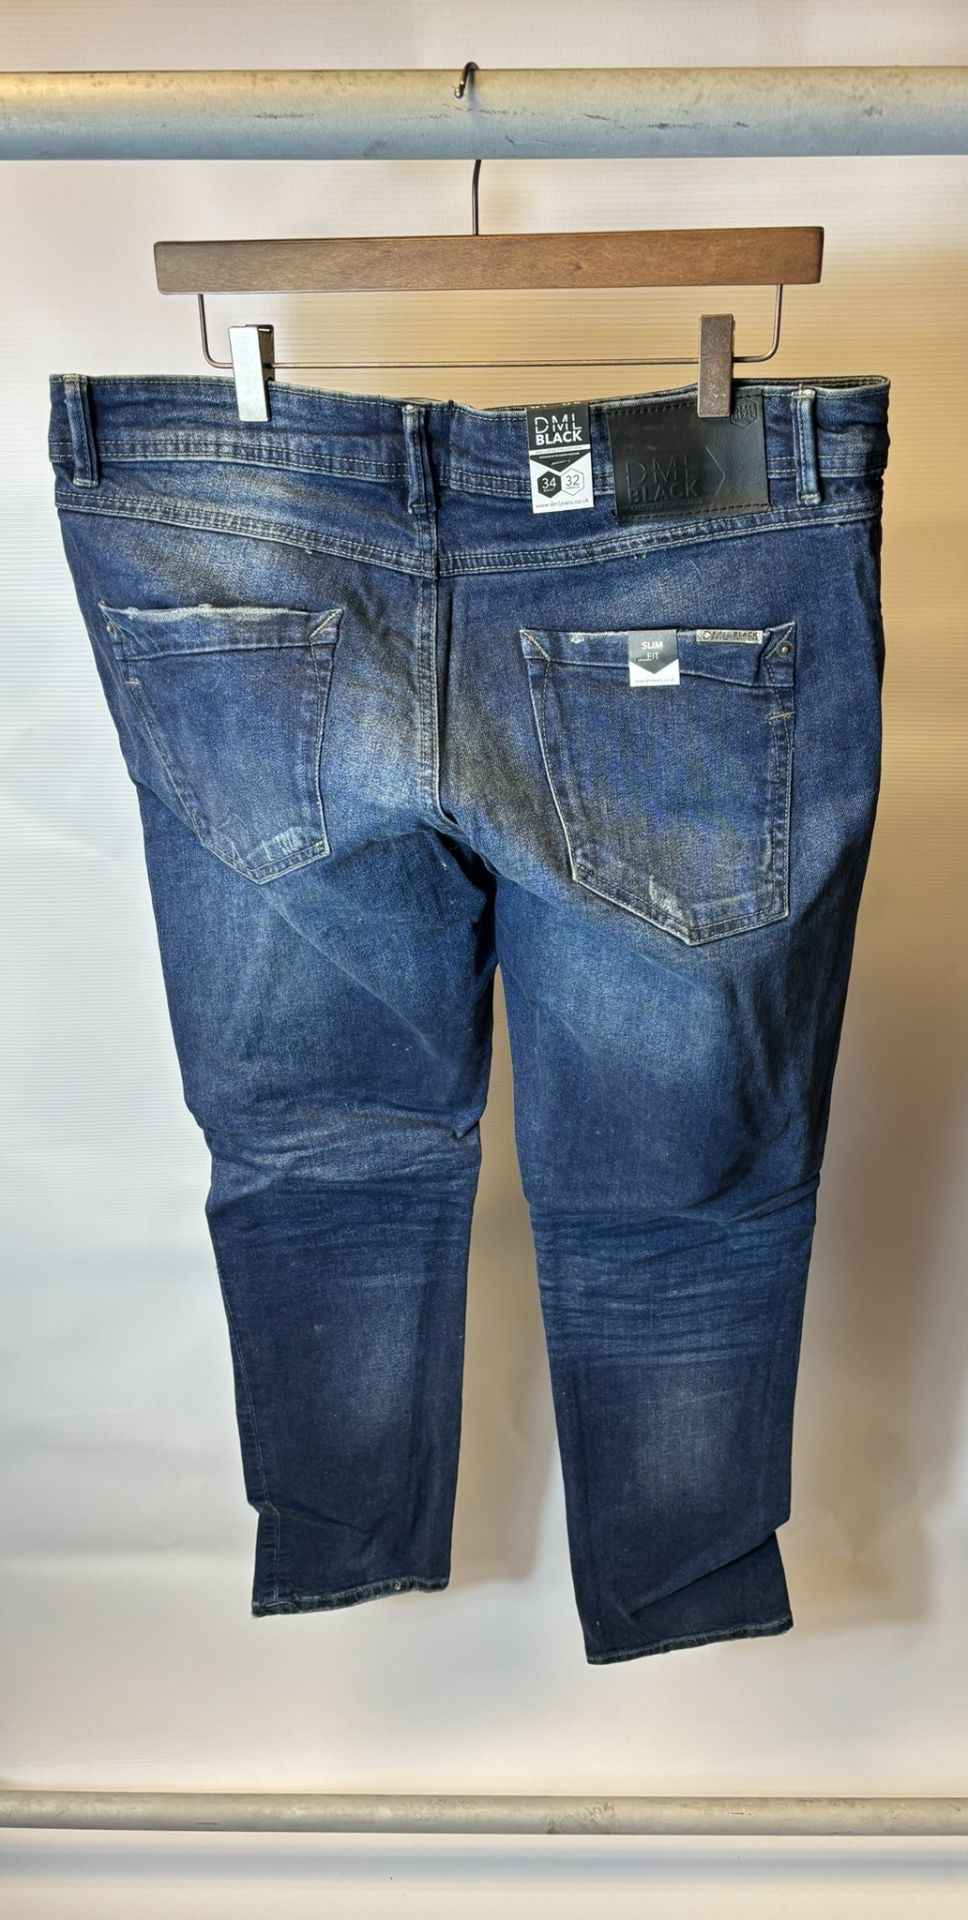 13 x Pairs Of various Sized DML Jeans Prophecy & Voyage Blue Jeans - Image 17 of 39